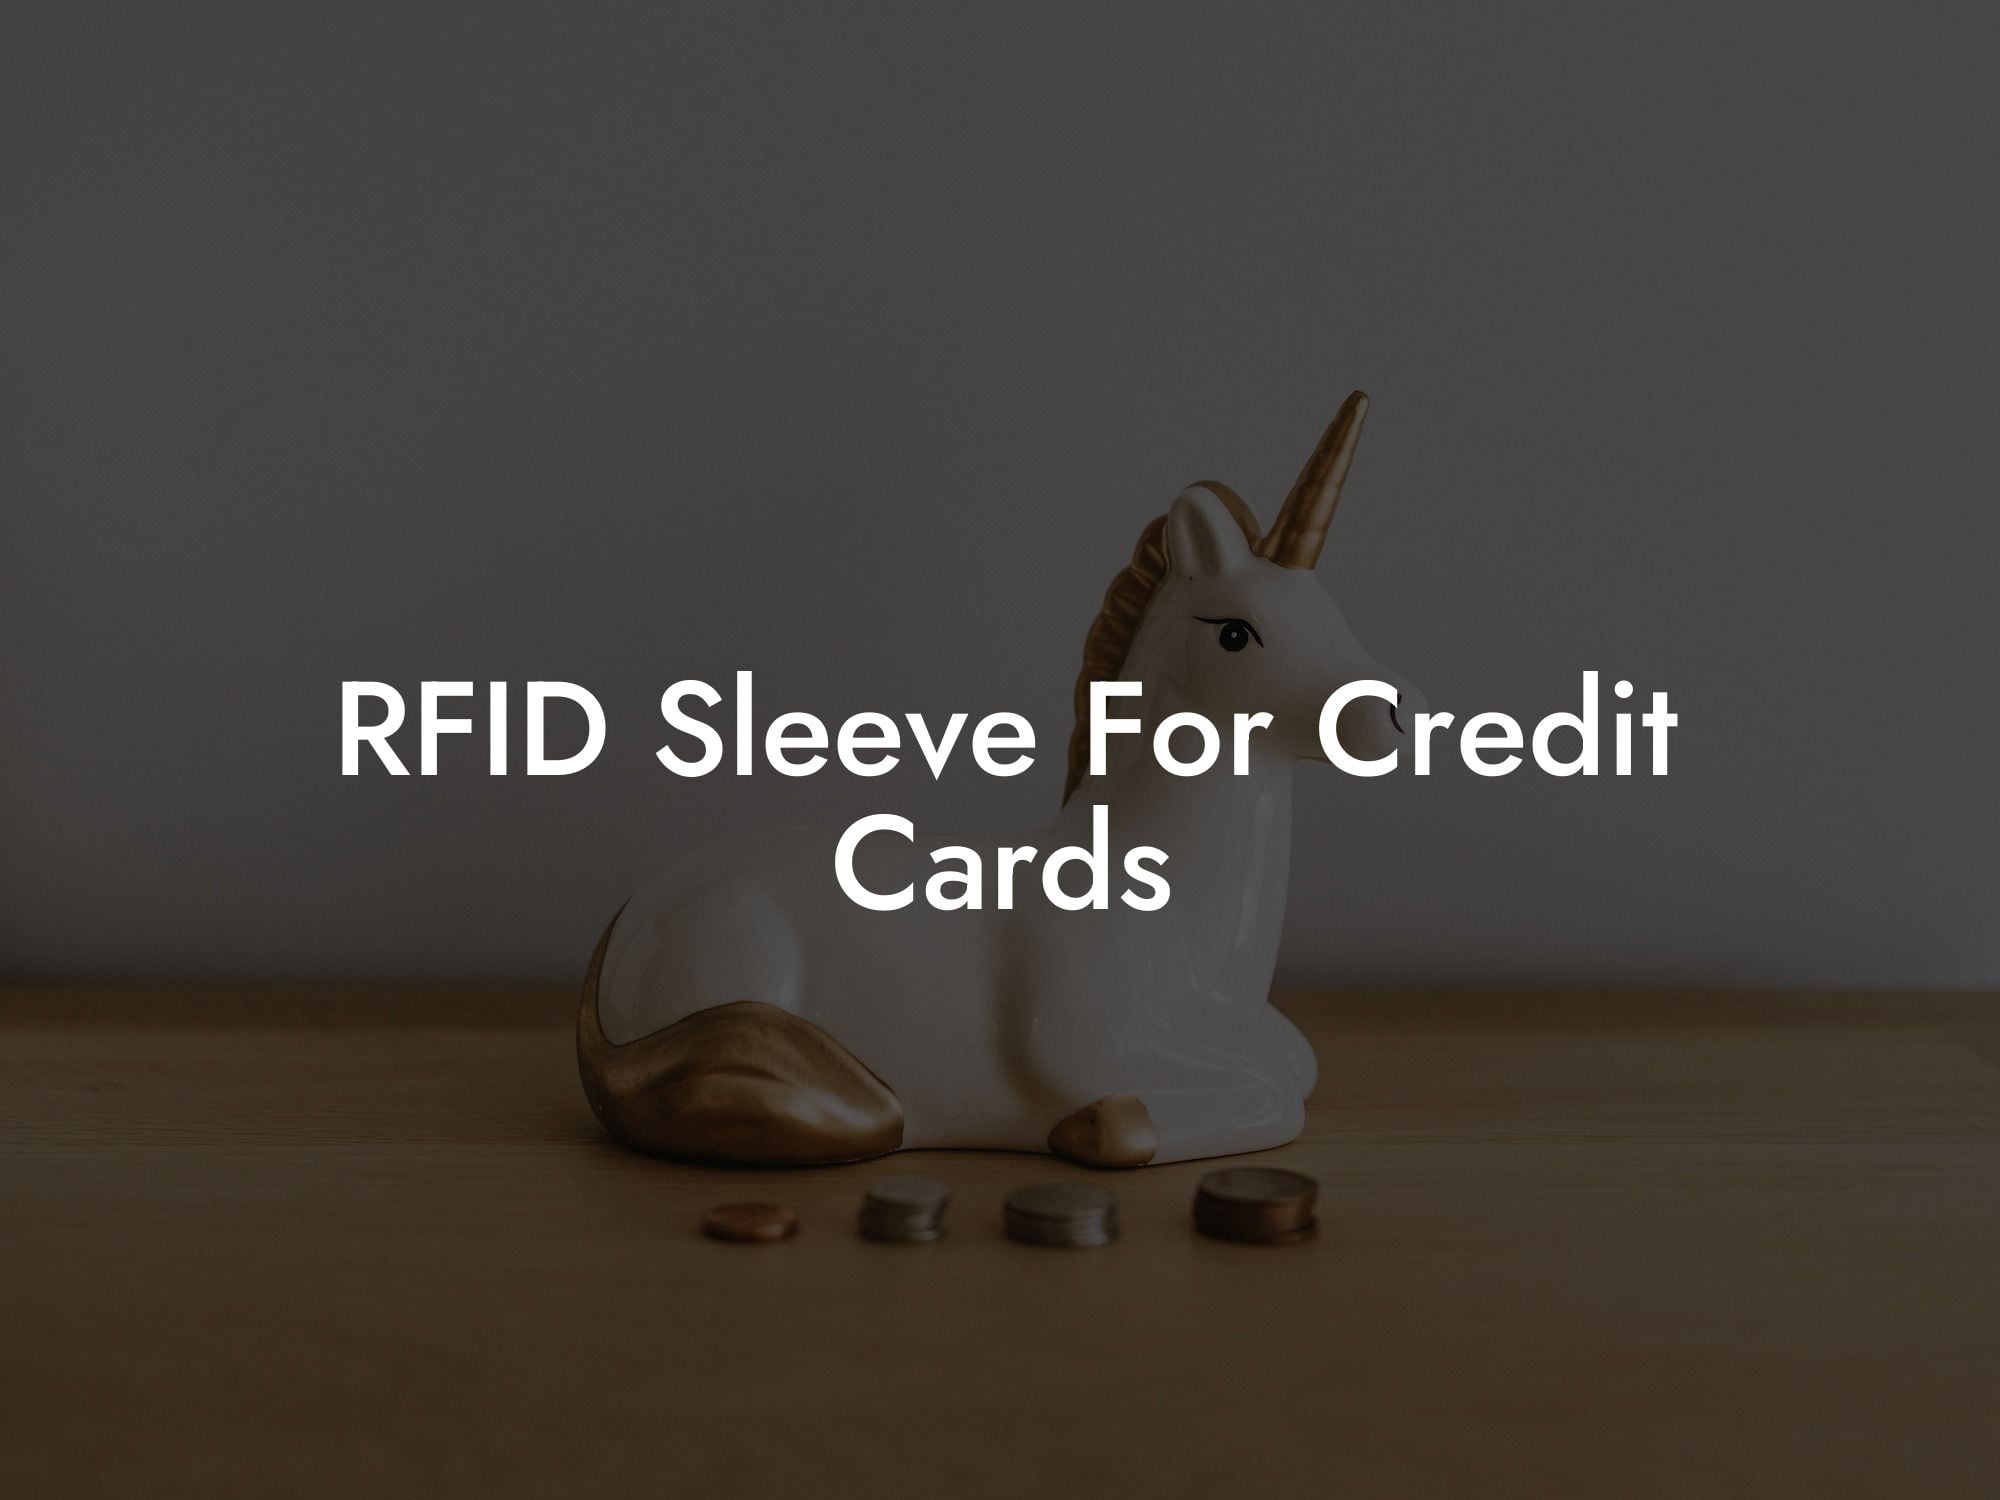 RFID Sleeve For Credit Cards